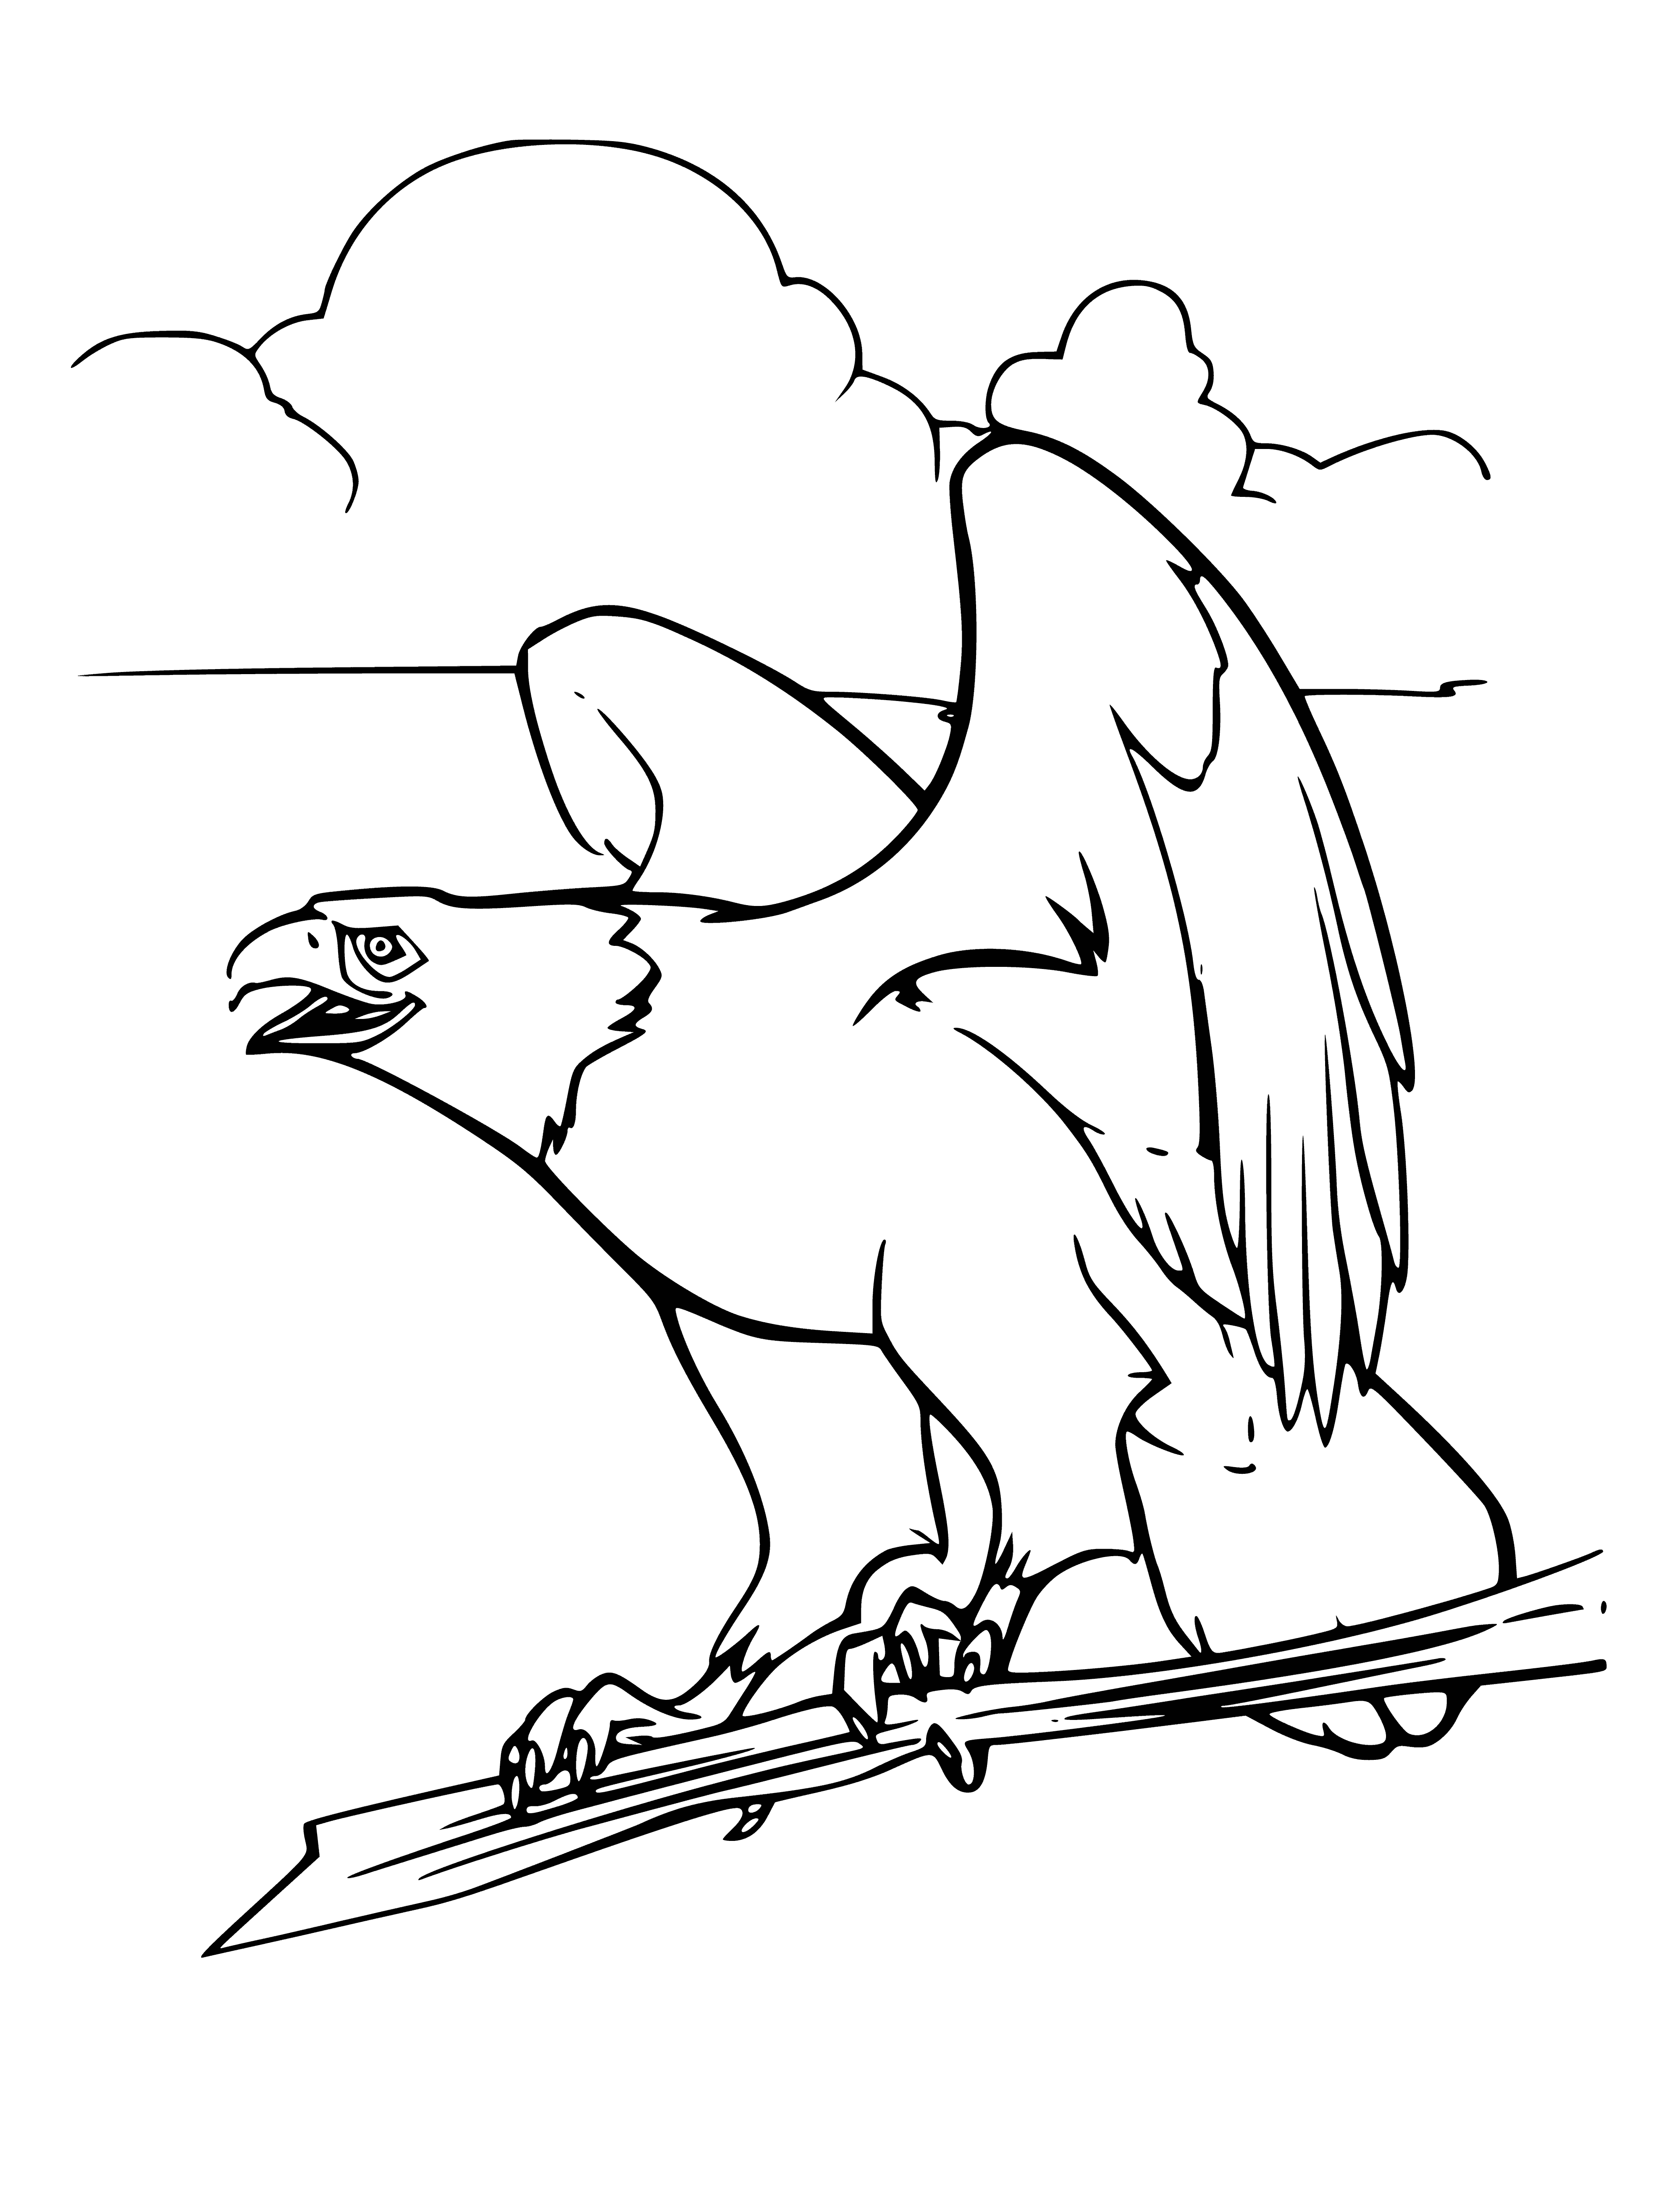 coloring page: Spirit's friend Eagle is a large bird with white feathers, yellow beak, brown body, and black wings, soaring through the sky.